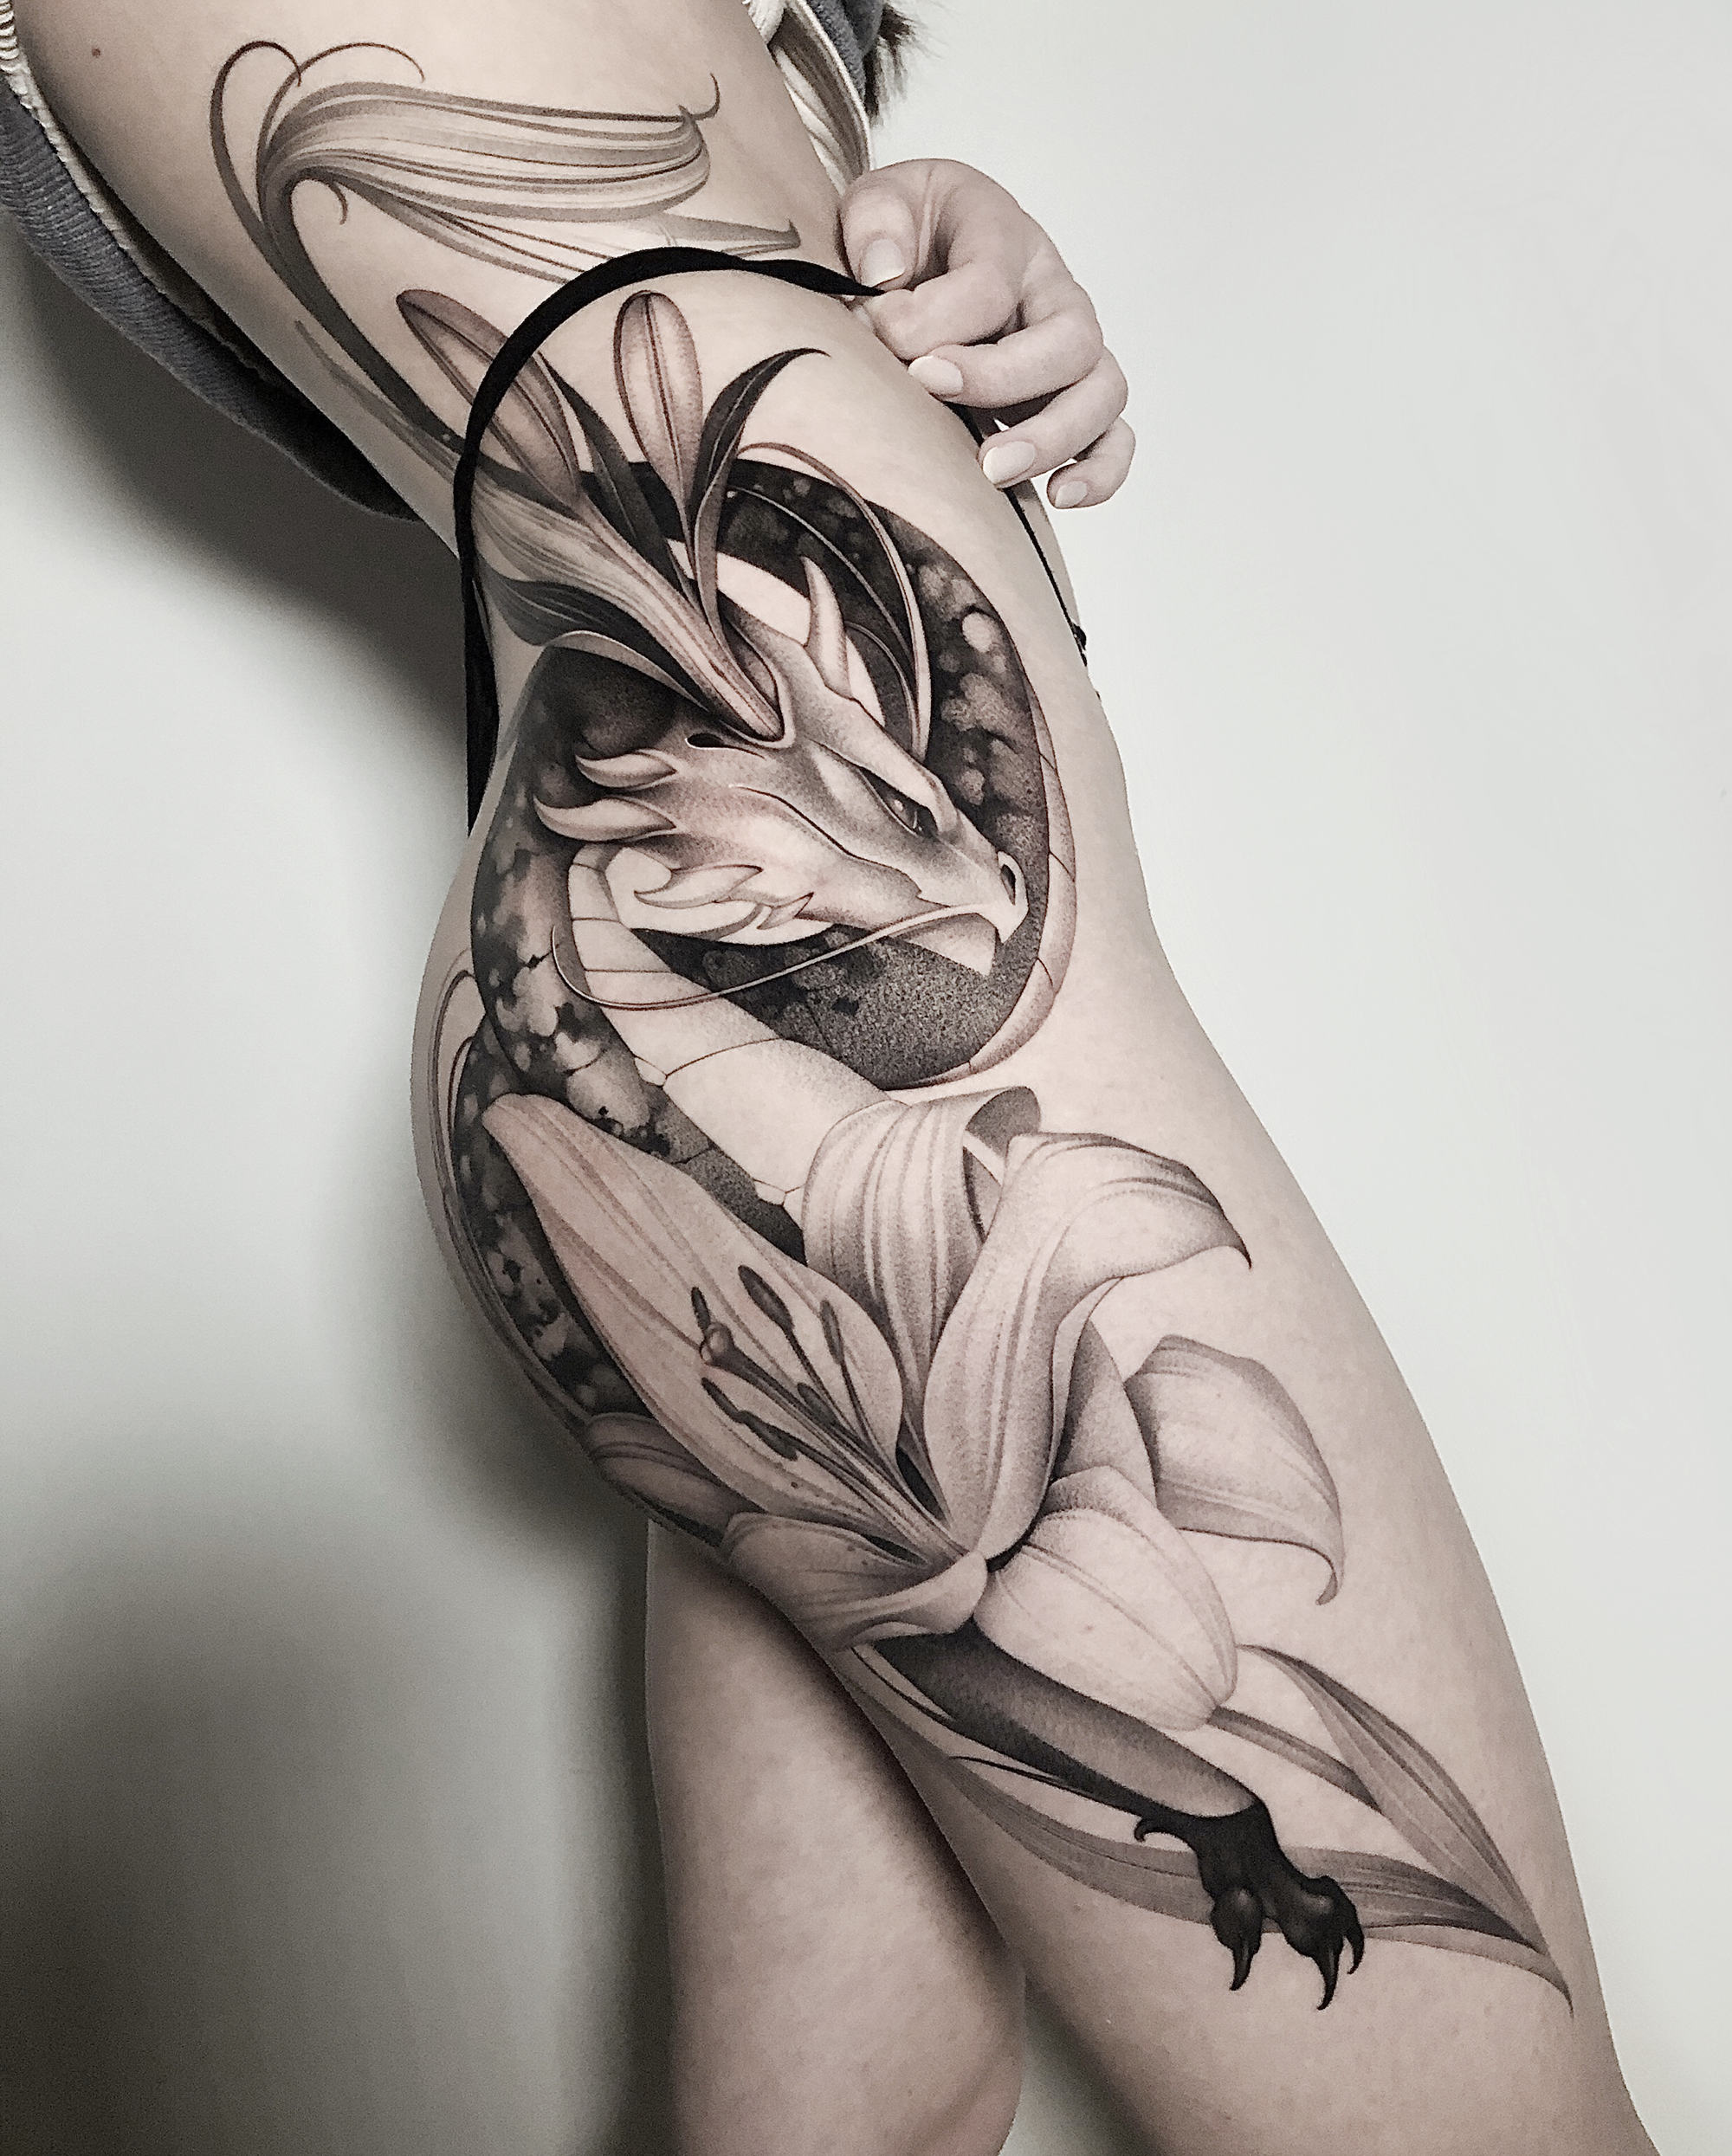 The dragon may symbolize power and change, while the lily may represent purity and innocence